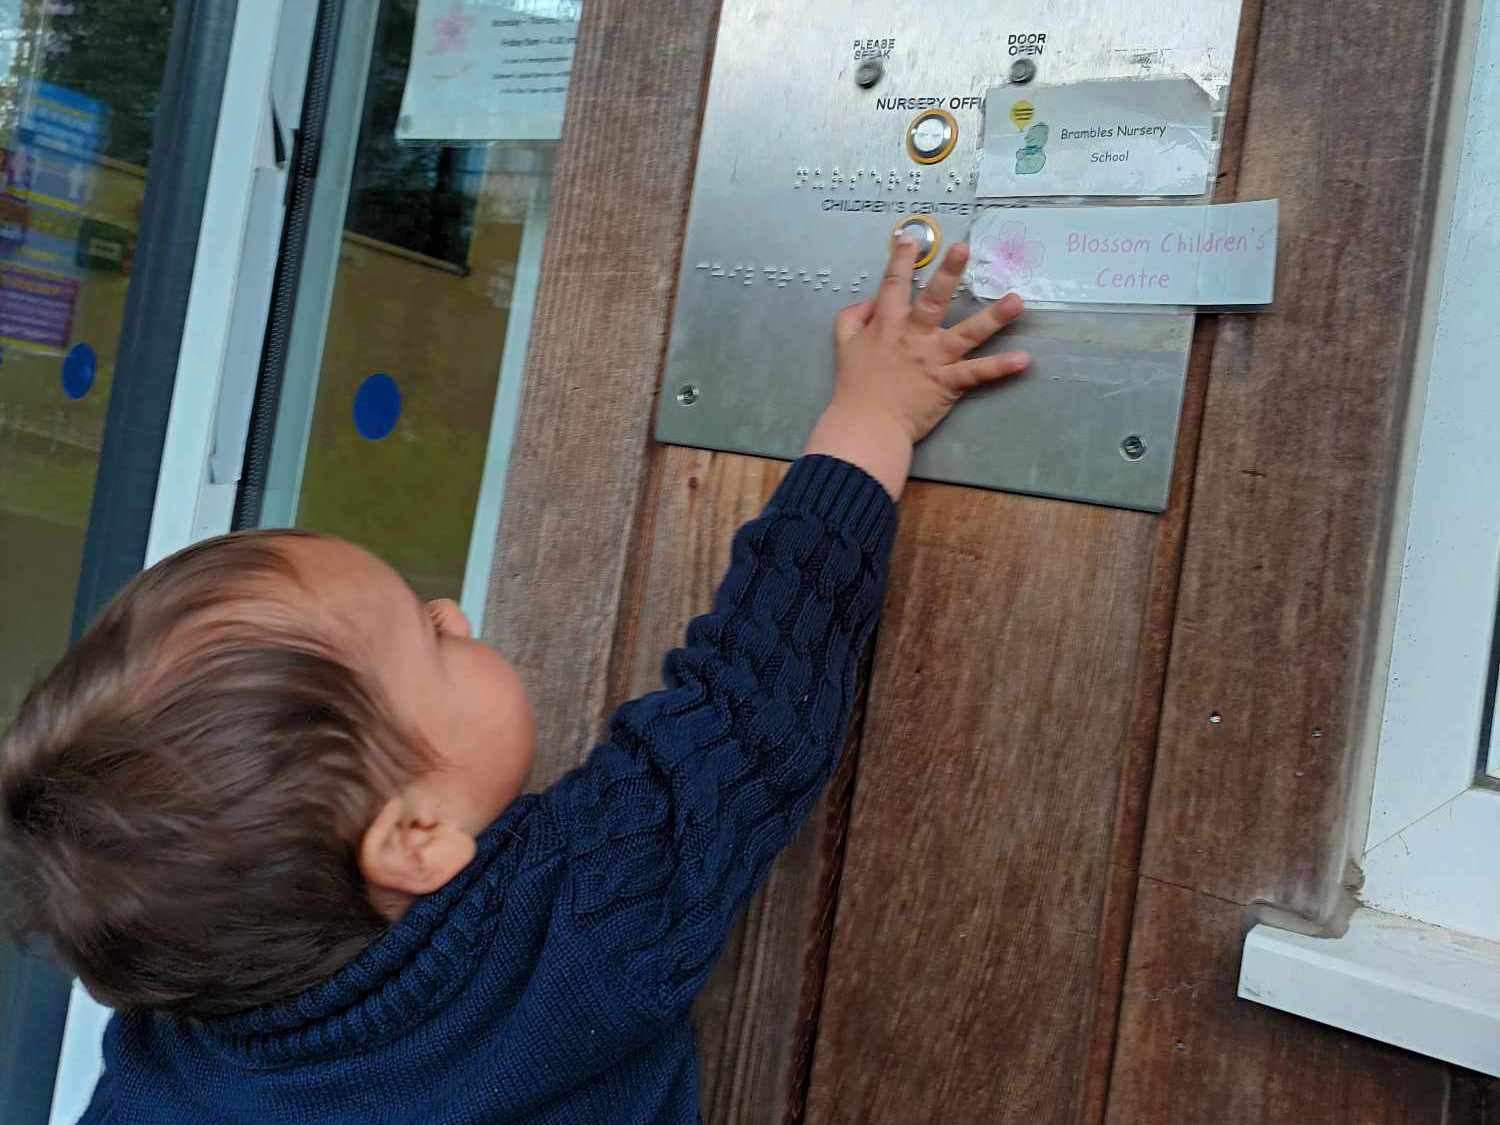 Heidi Taylor's son Rowen reaching up to ring the doorbell of Blossom Children's Centre in Deal